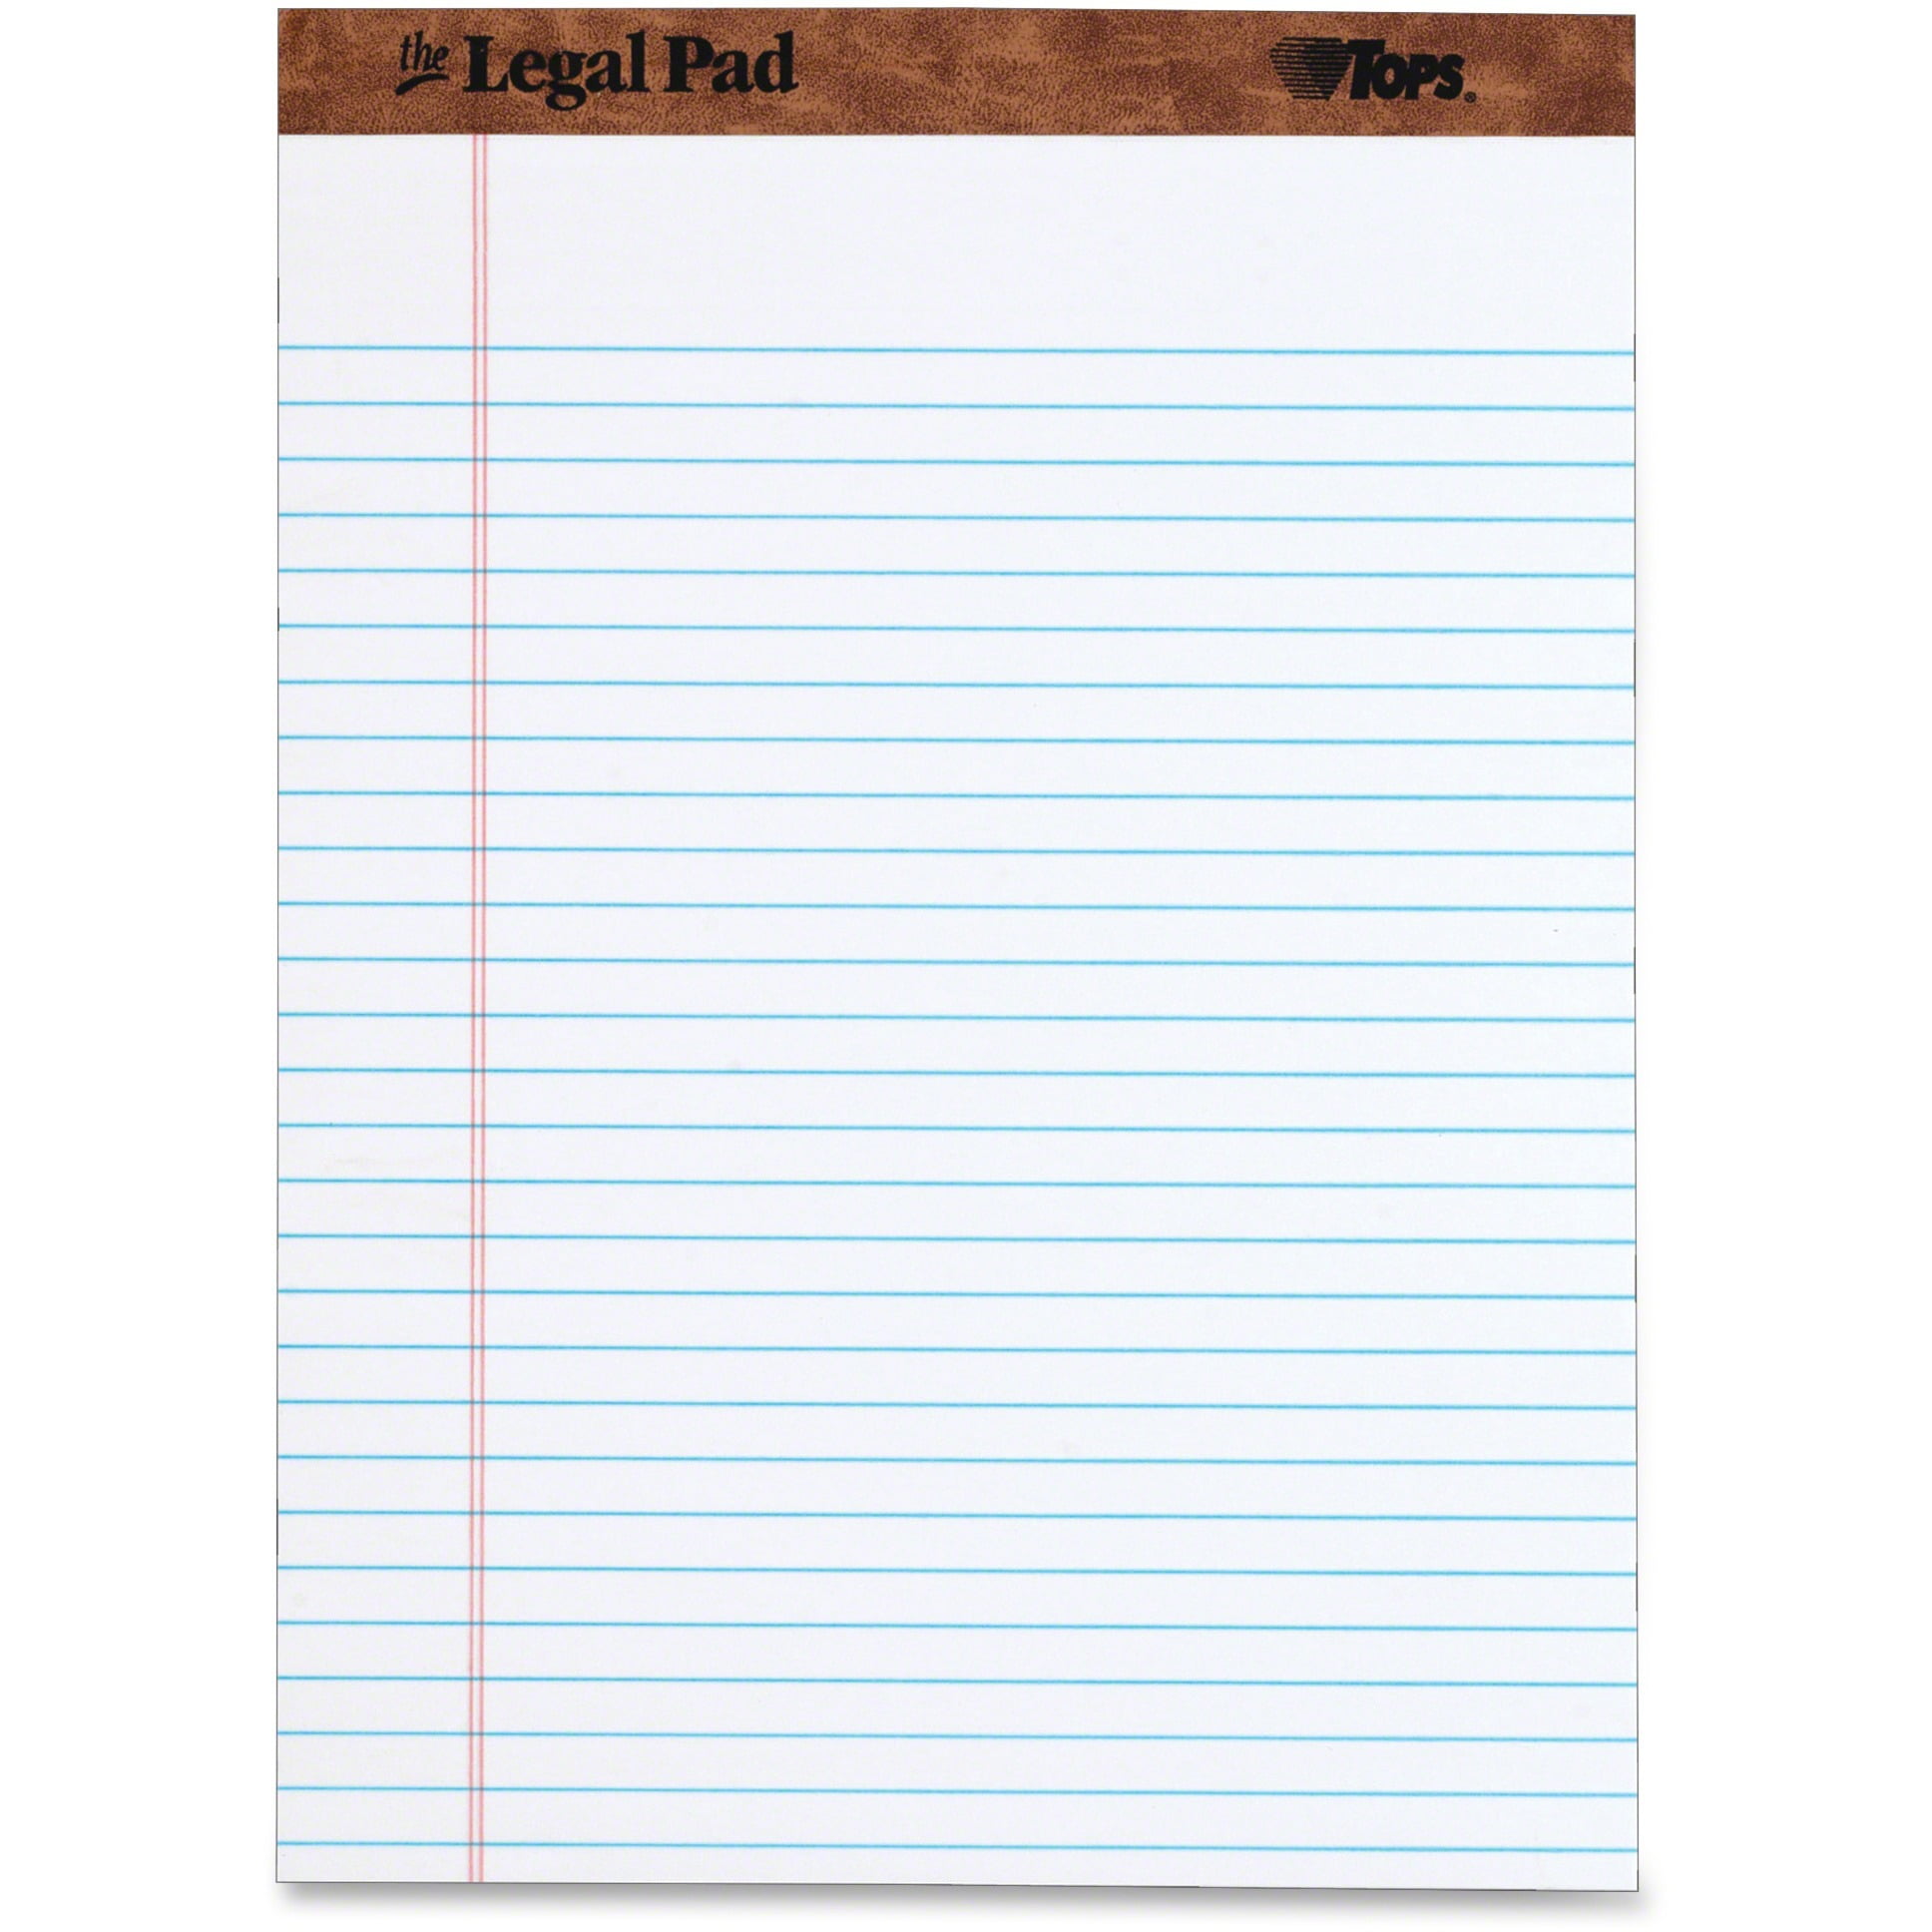 Tops The Legal Pad Writing Pads 12 Count 8-1/2 x 11-3/4 50 Sheets 1 Pack Legal Rule